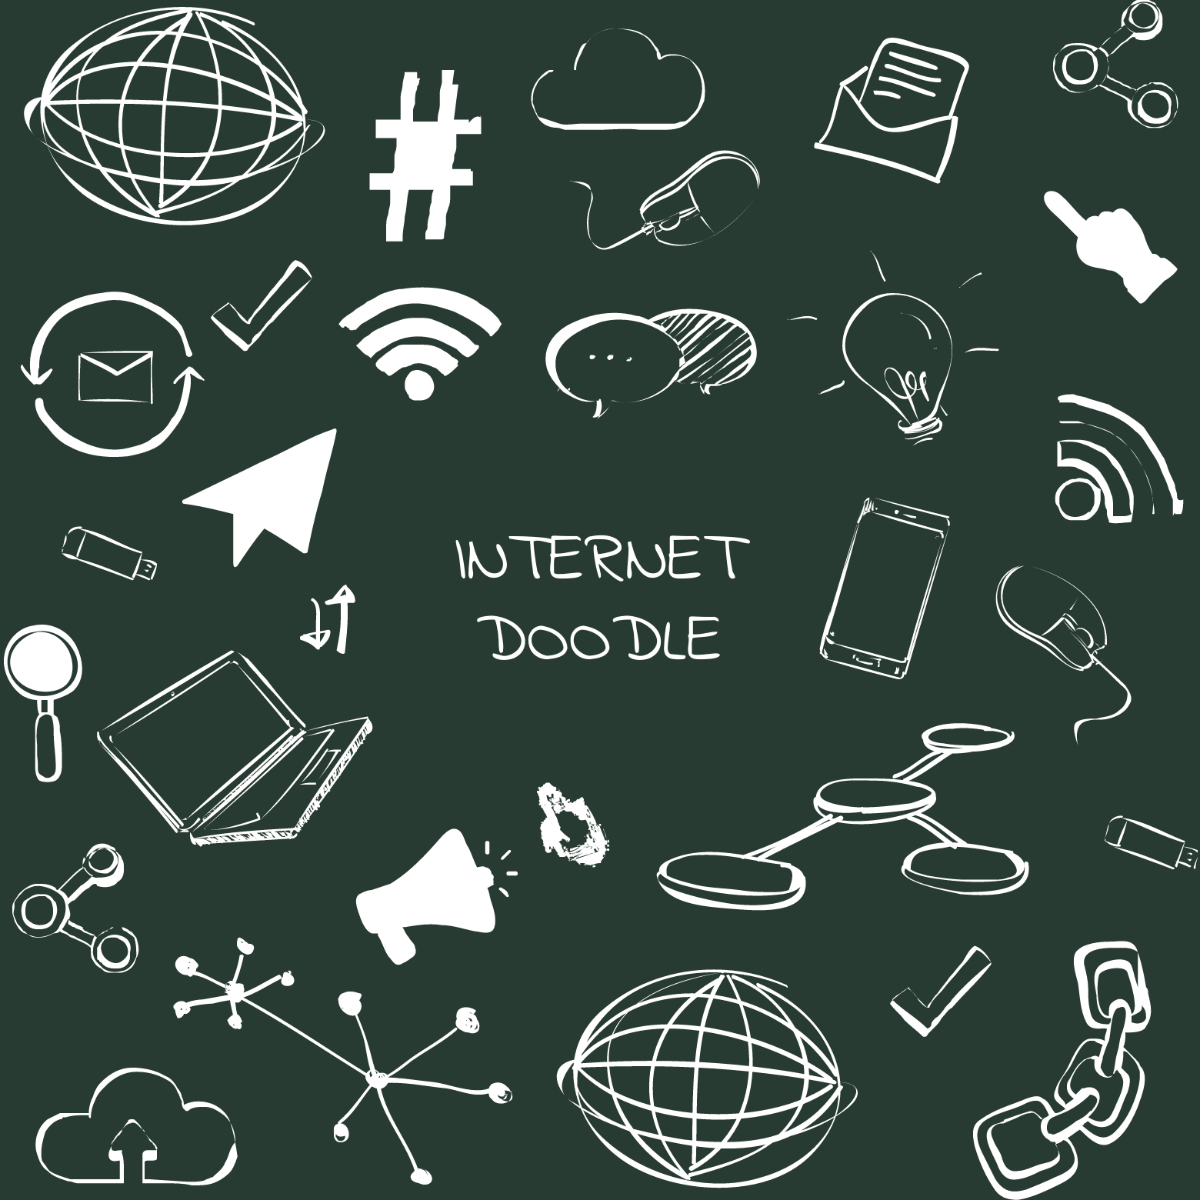 Free Internet Doodle Vector Template